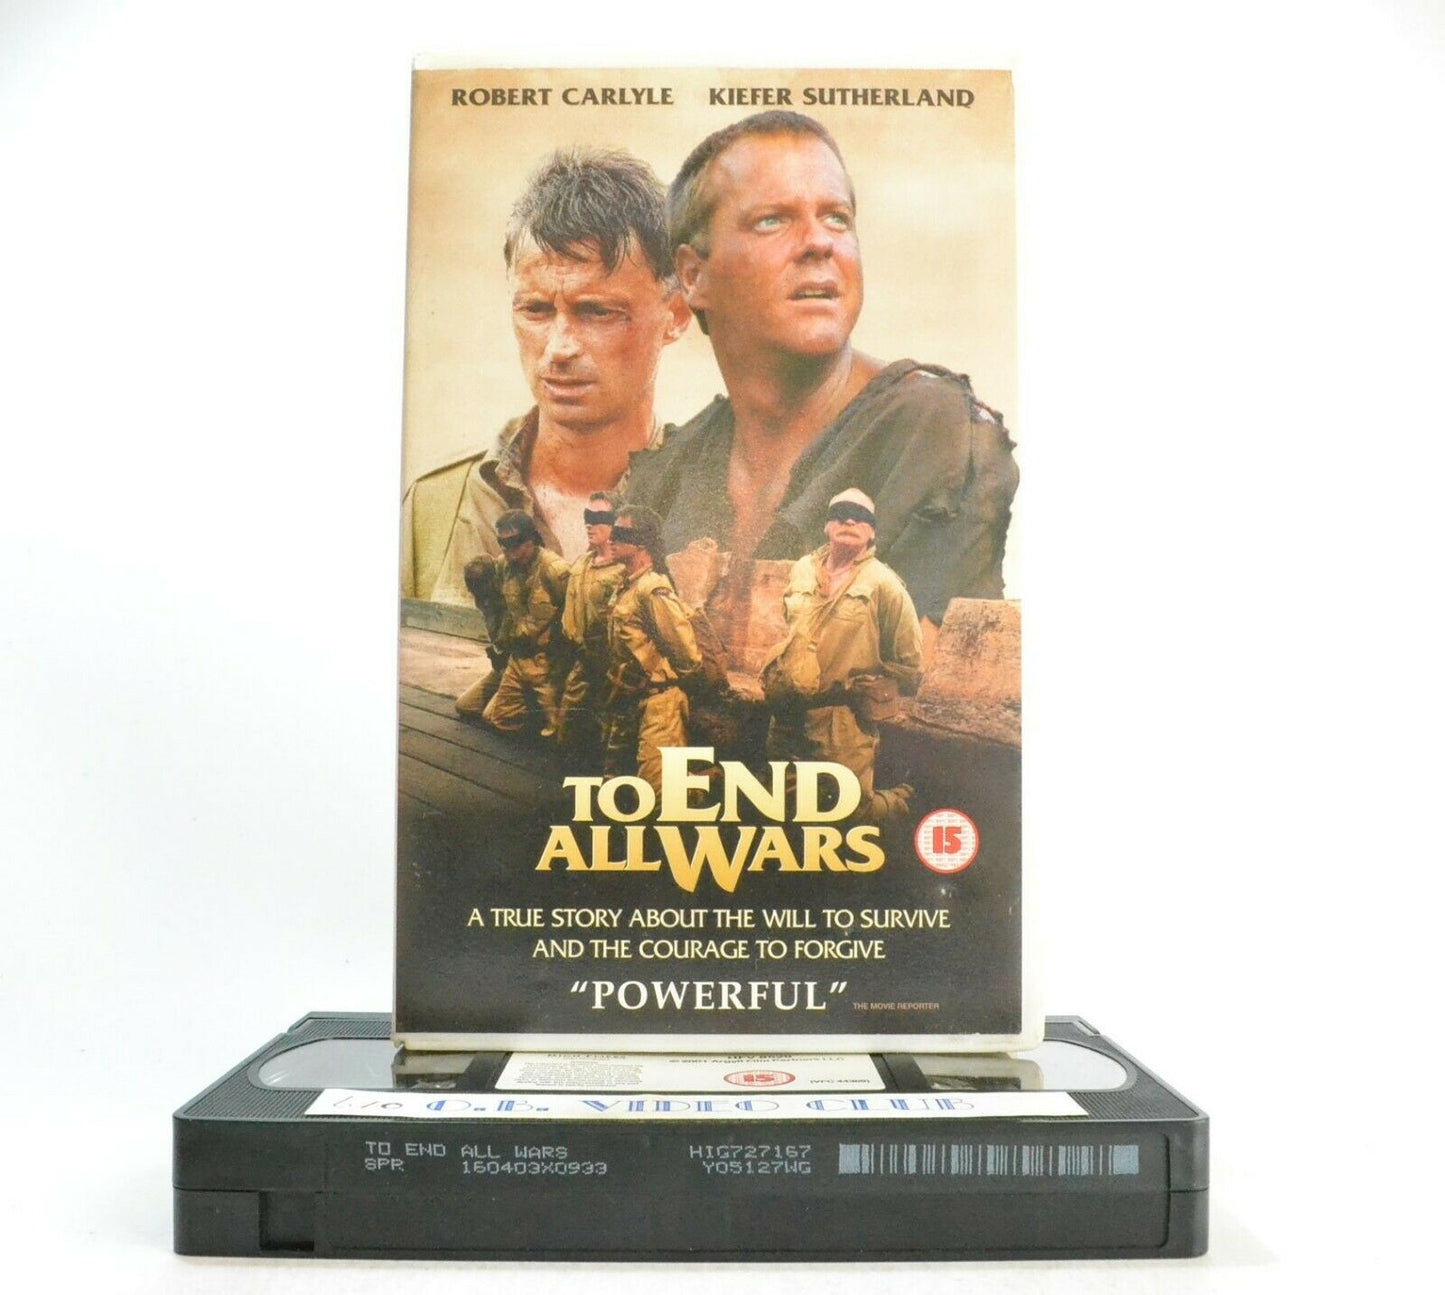 To End All Wars: War Drama (2001) - Large Box - R.Carlyle/K.Sutherland - Pal VHS-